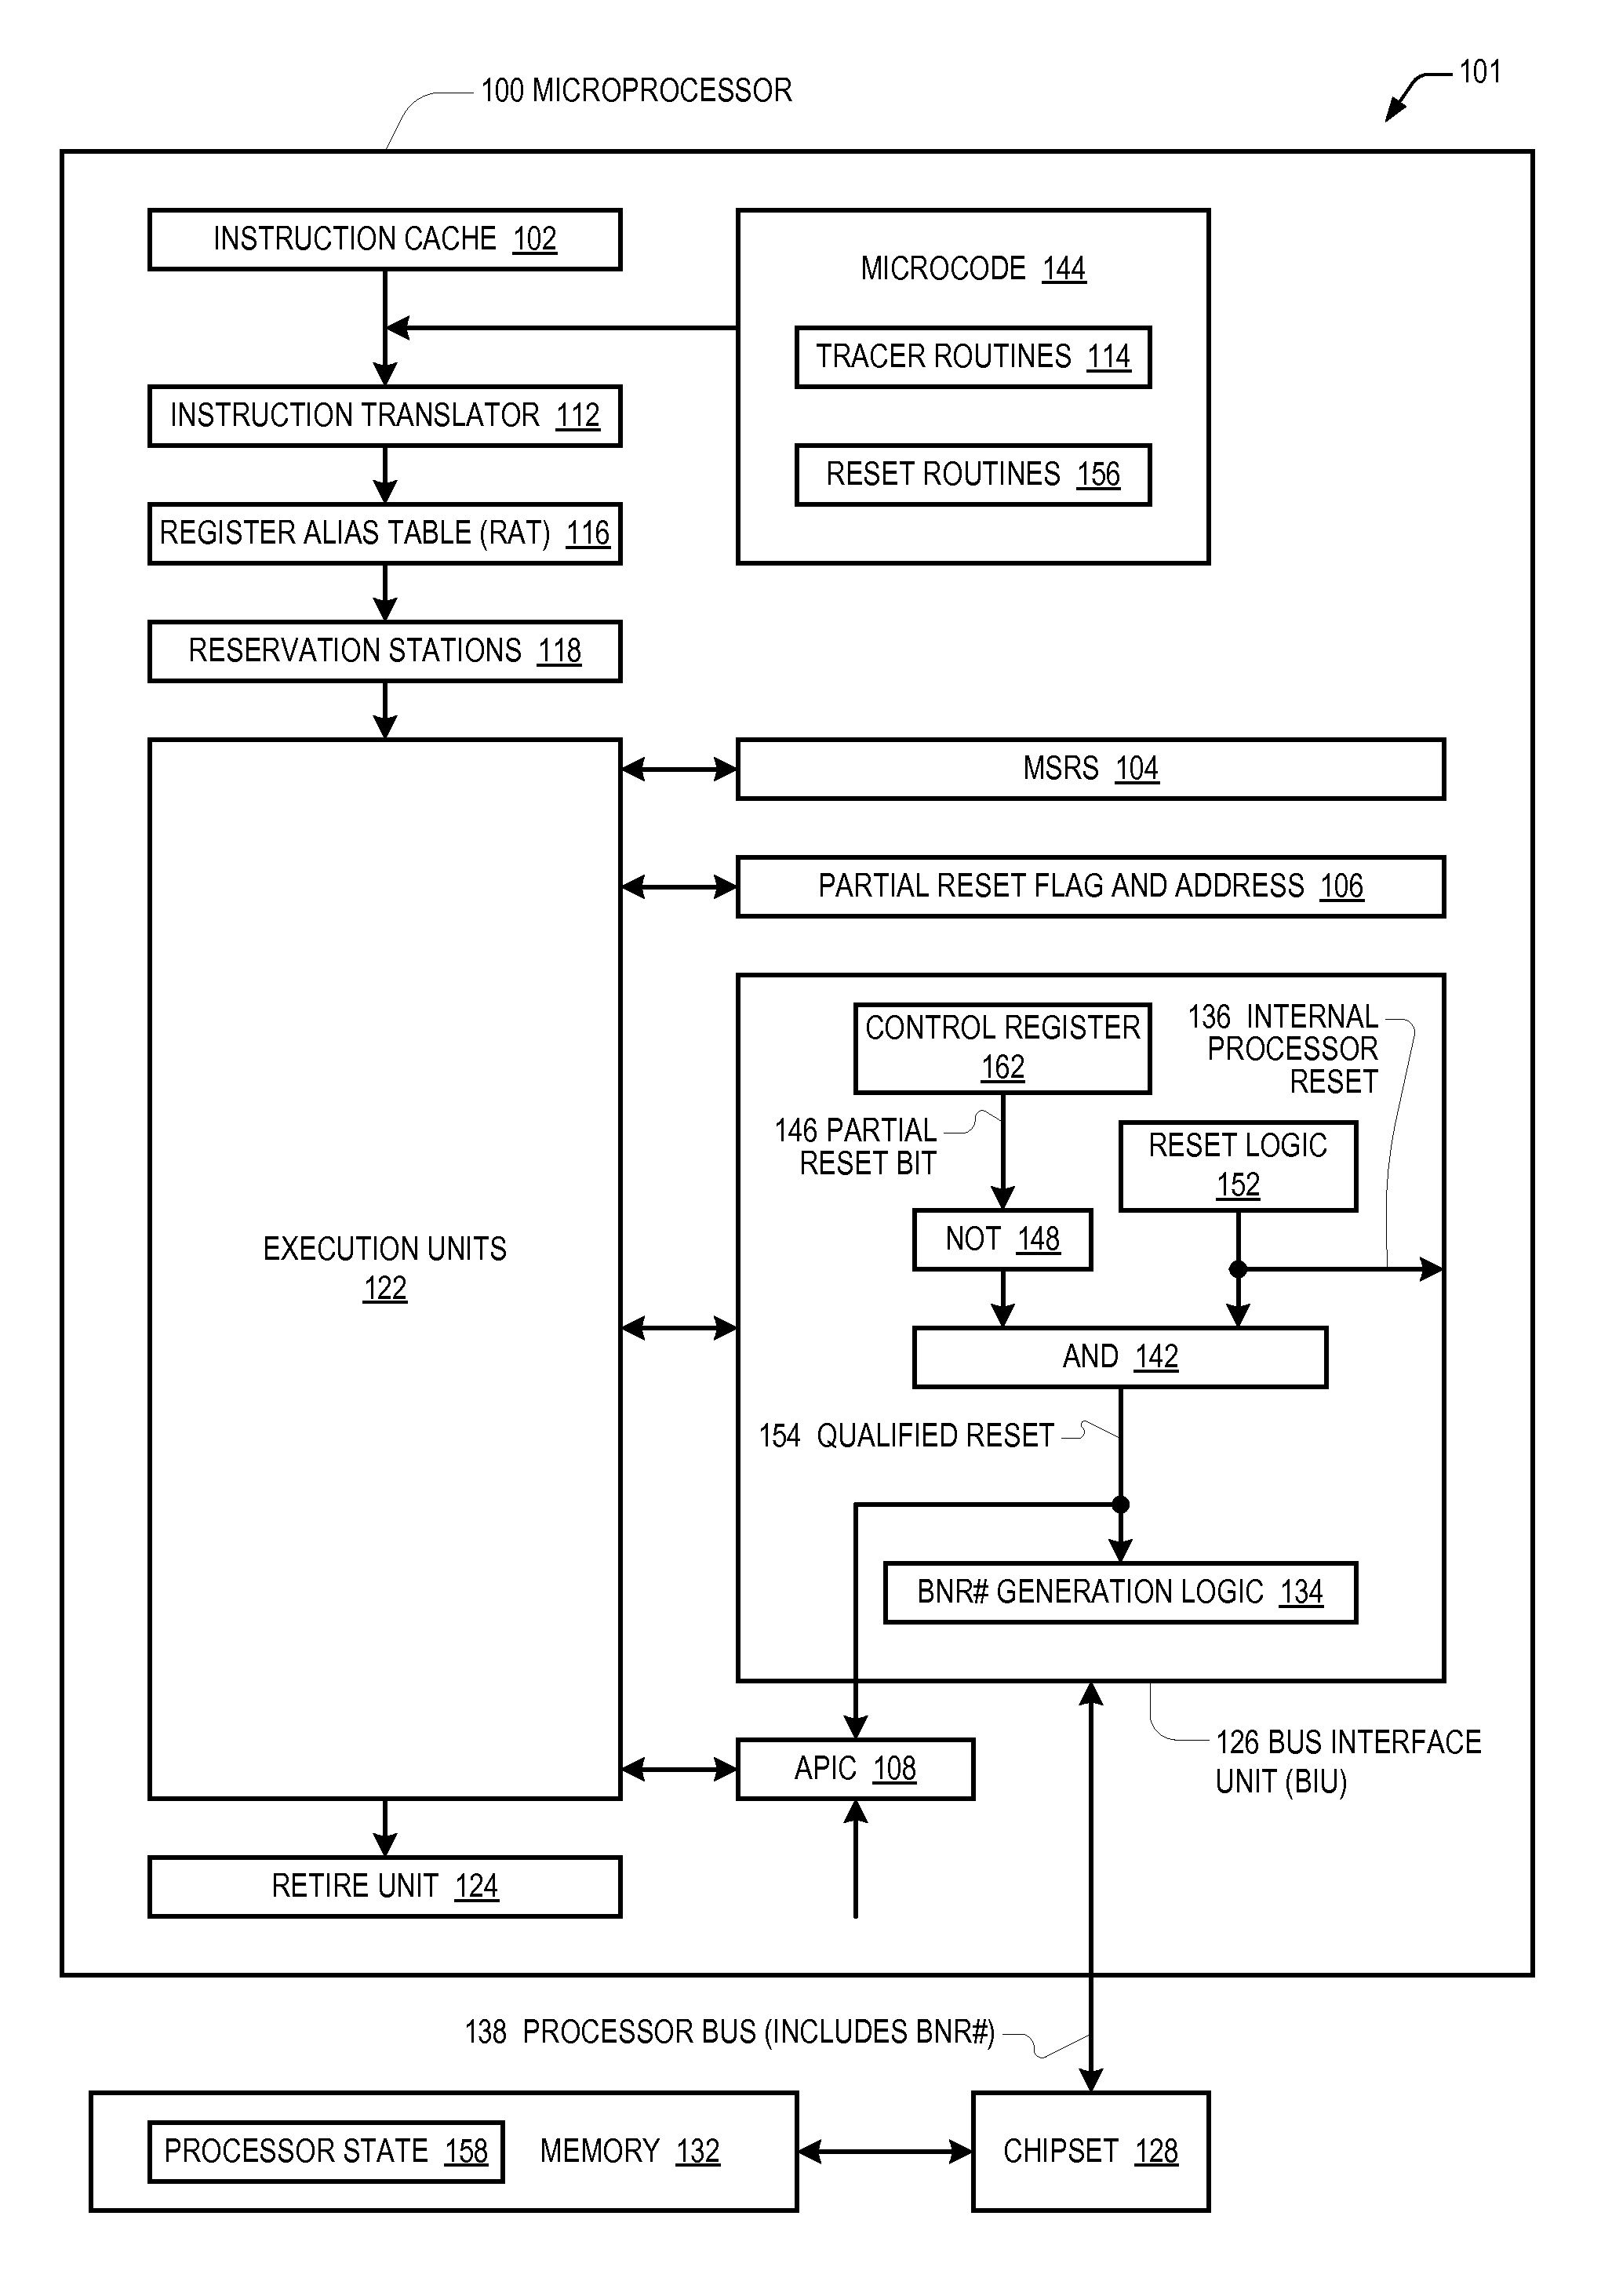 Microprocessor with system-robust self-reset capability